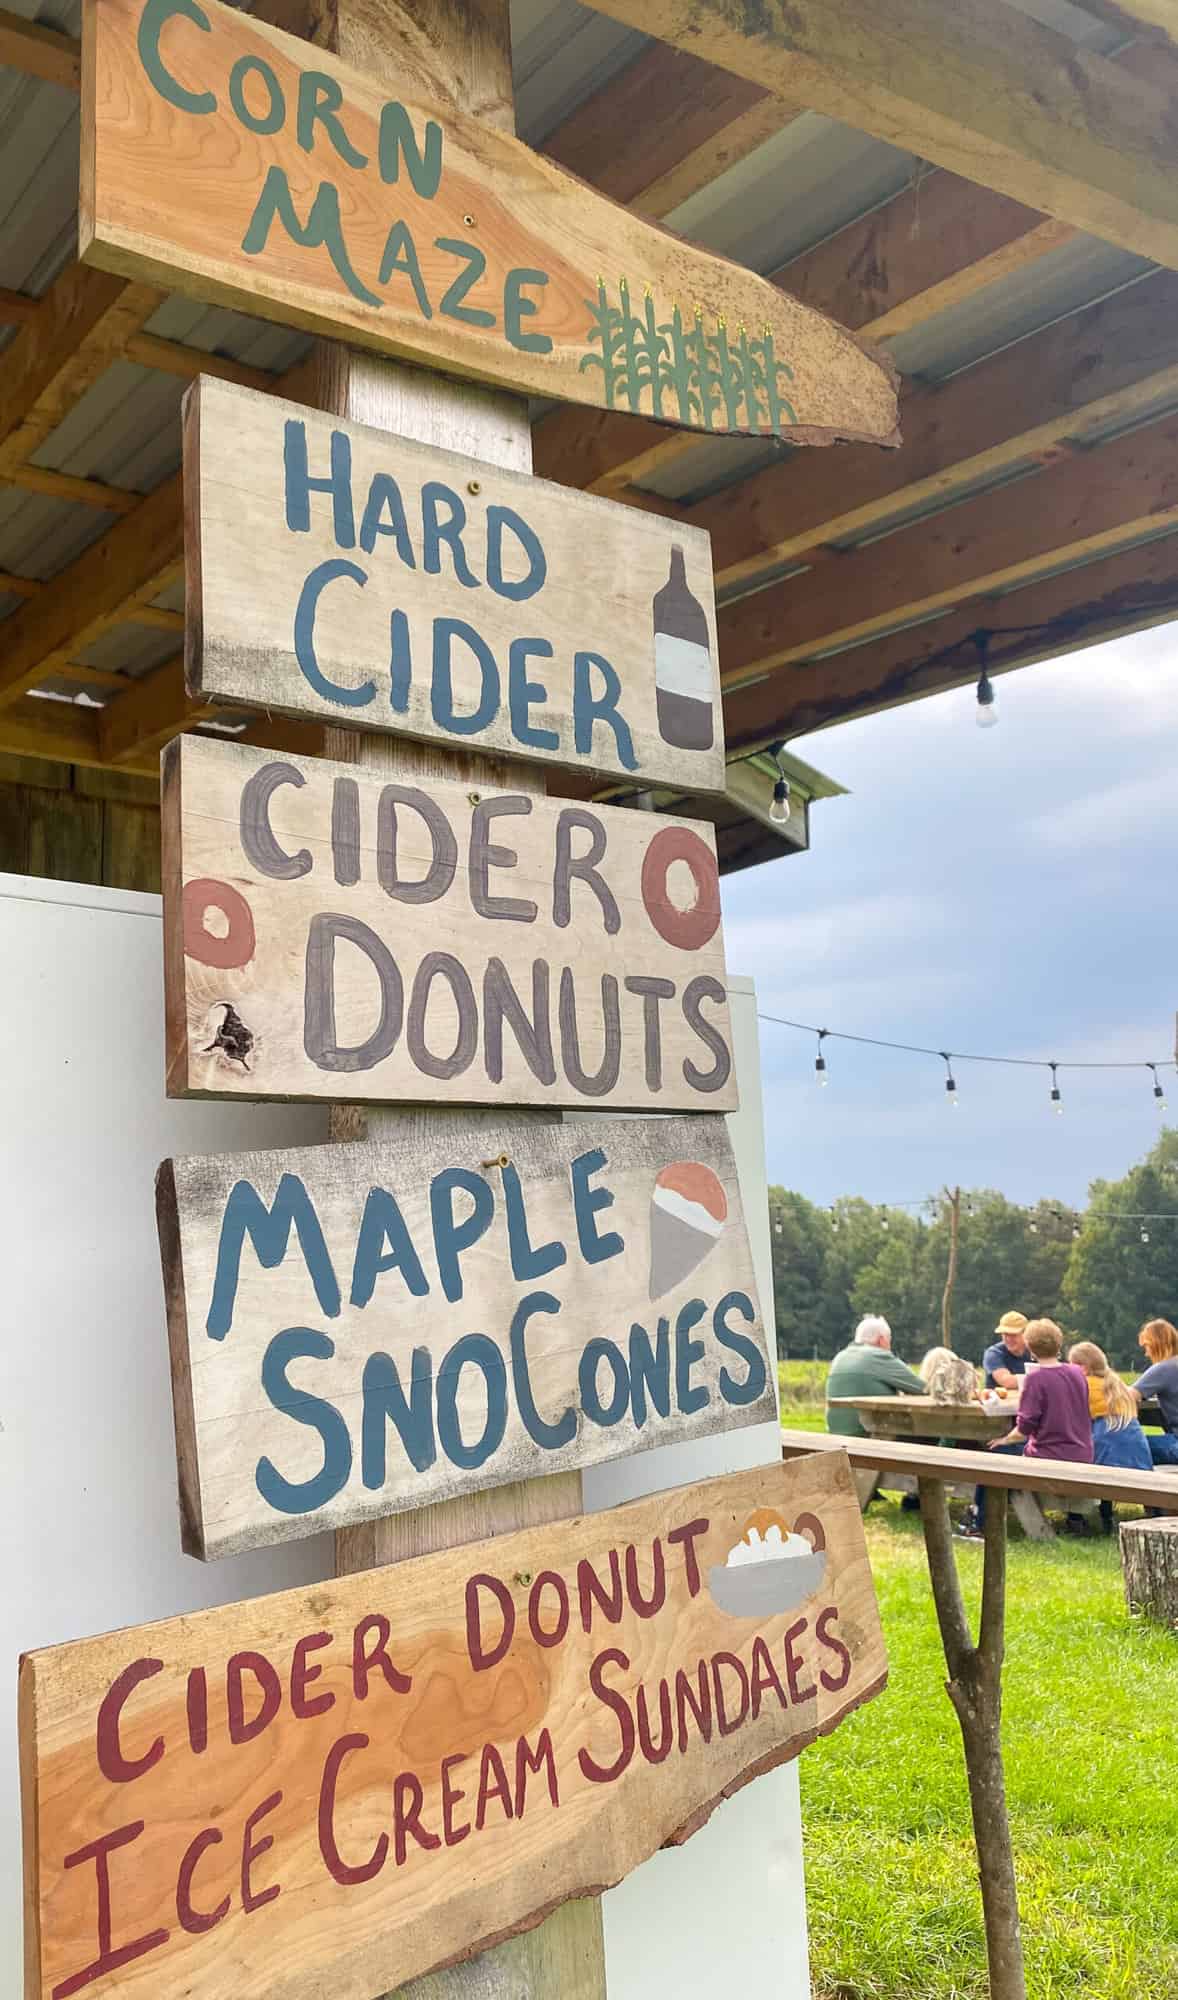 Hand painted cider and cider donut signs.